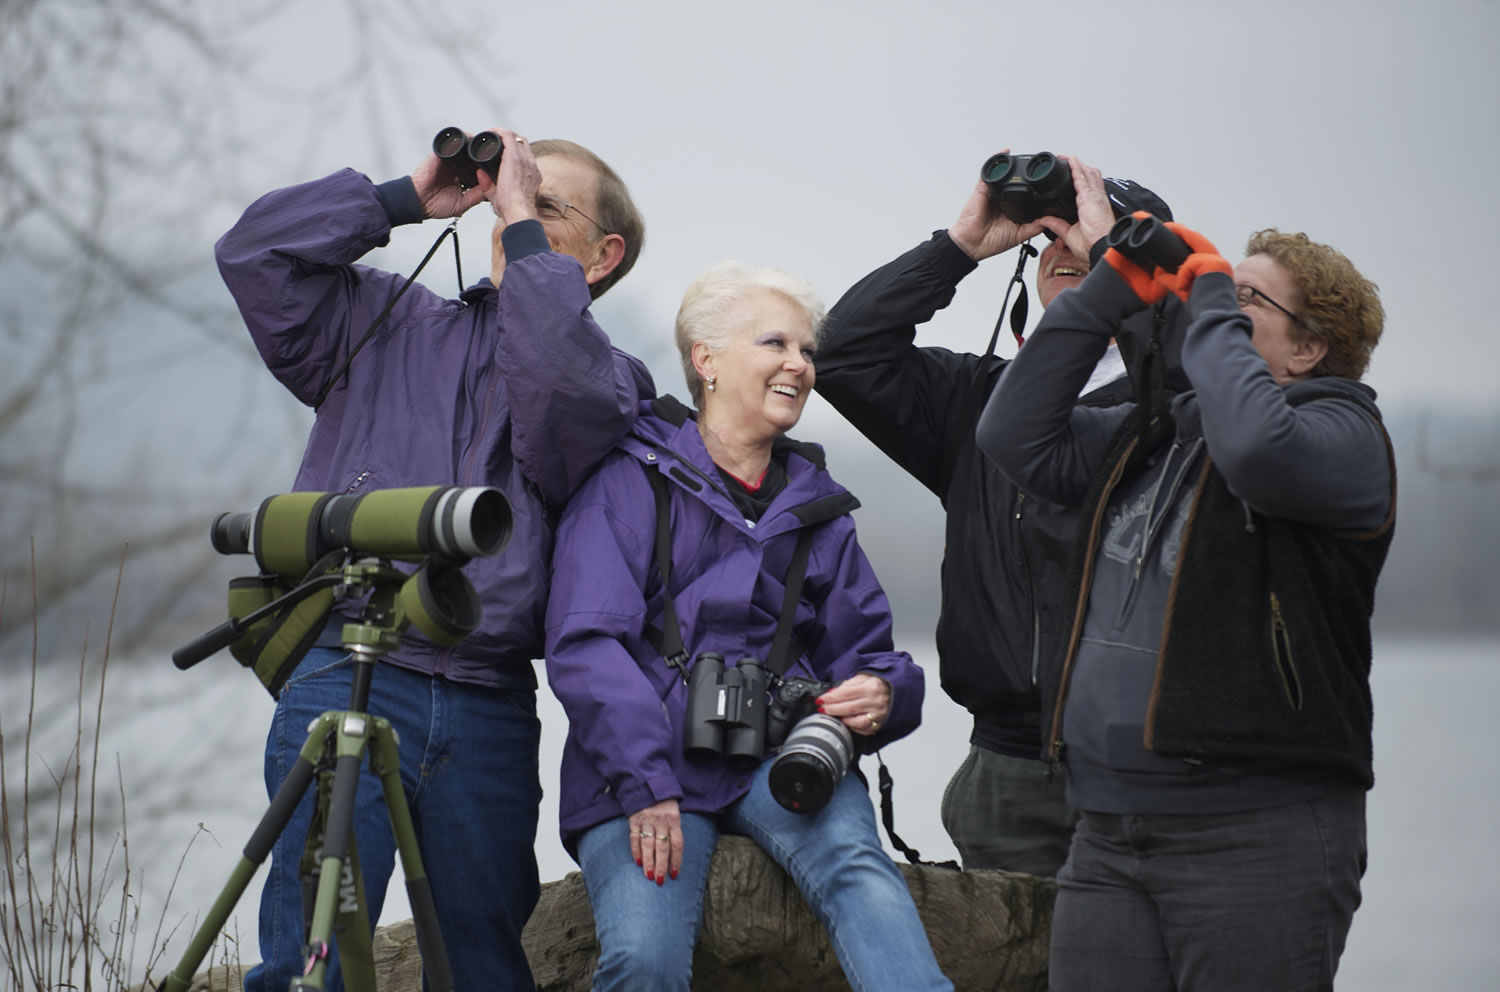 Birders, from left, Arden and Sherry Hagen and Eric and Tammy Bjorkman, all of Vancouver, spent 2012 trying to track down as many species of birds as possible in a challenge known as a &quot;big year.&quot; Both couples beat the previous state record of 359 birds.